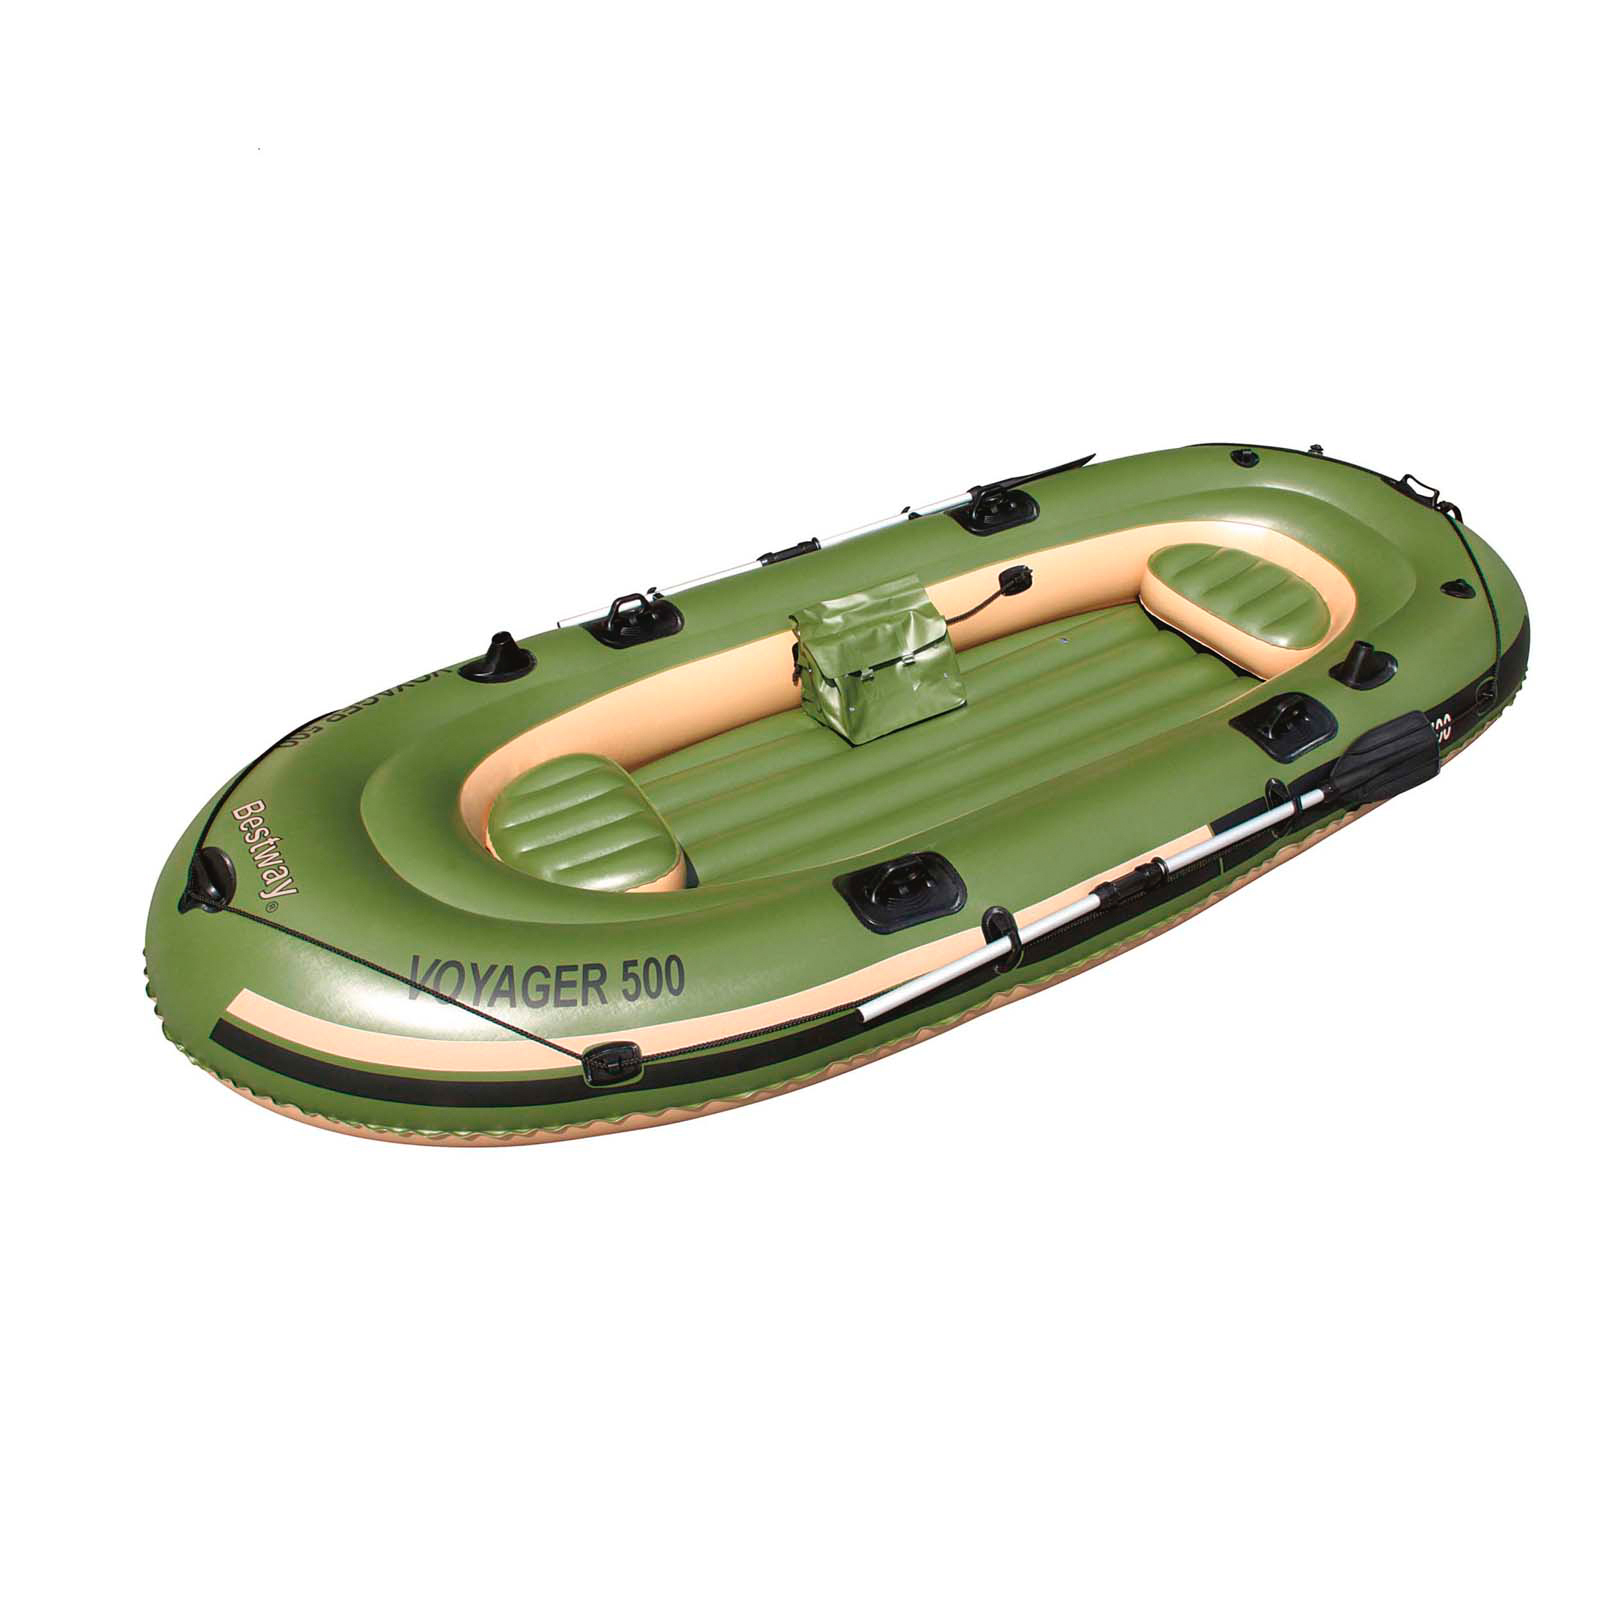 UPC 821808650019 product image for Bestway Voyager 500 Inflatable Boat  65001B | upcitemdb.com